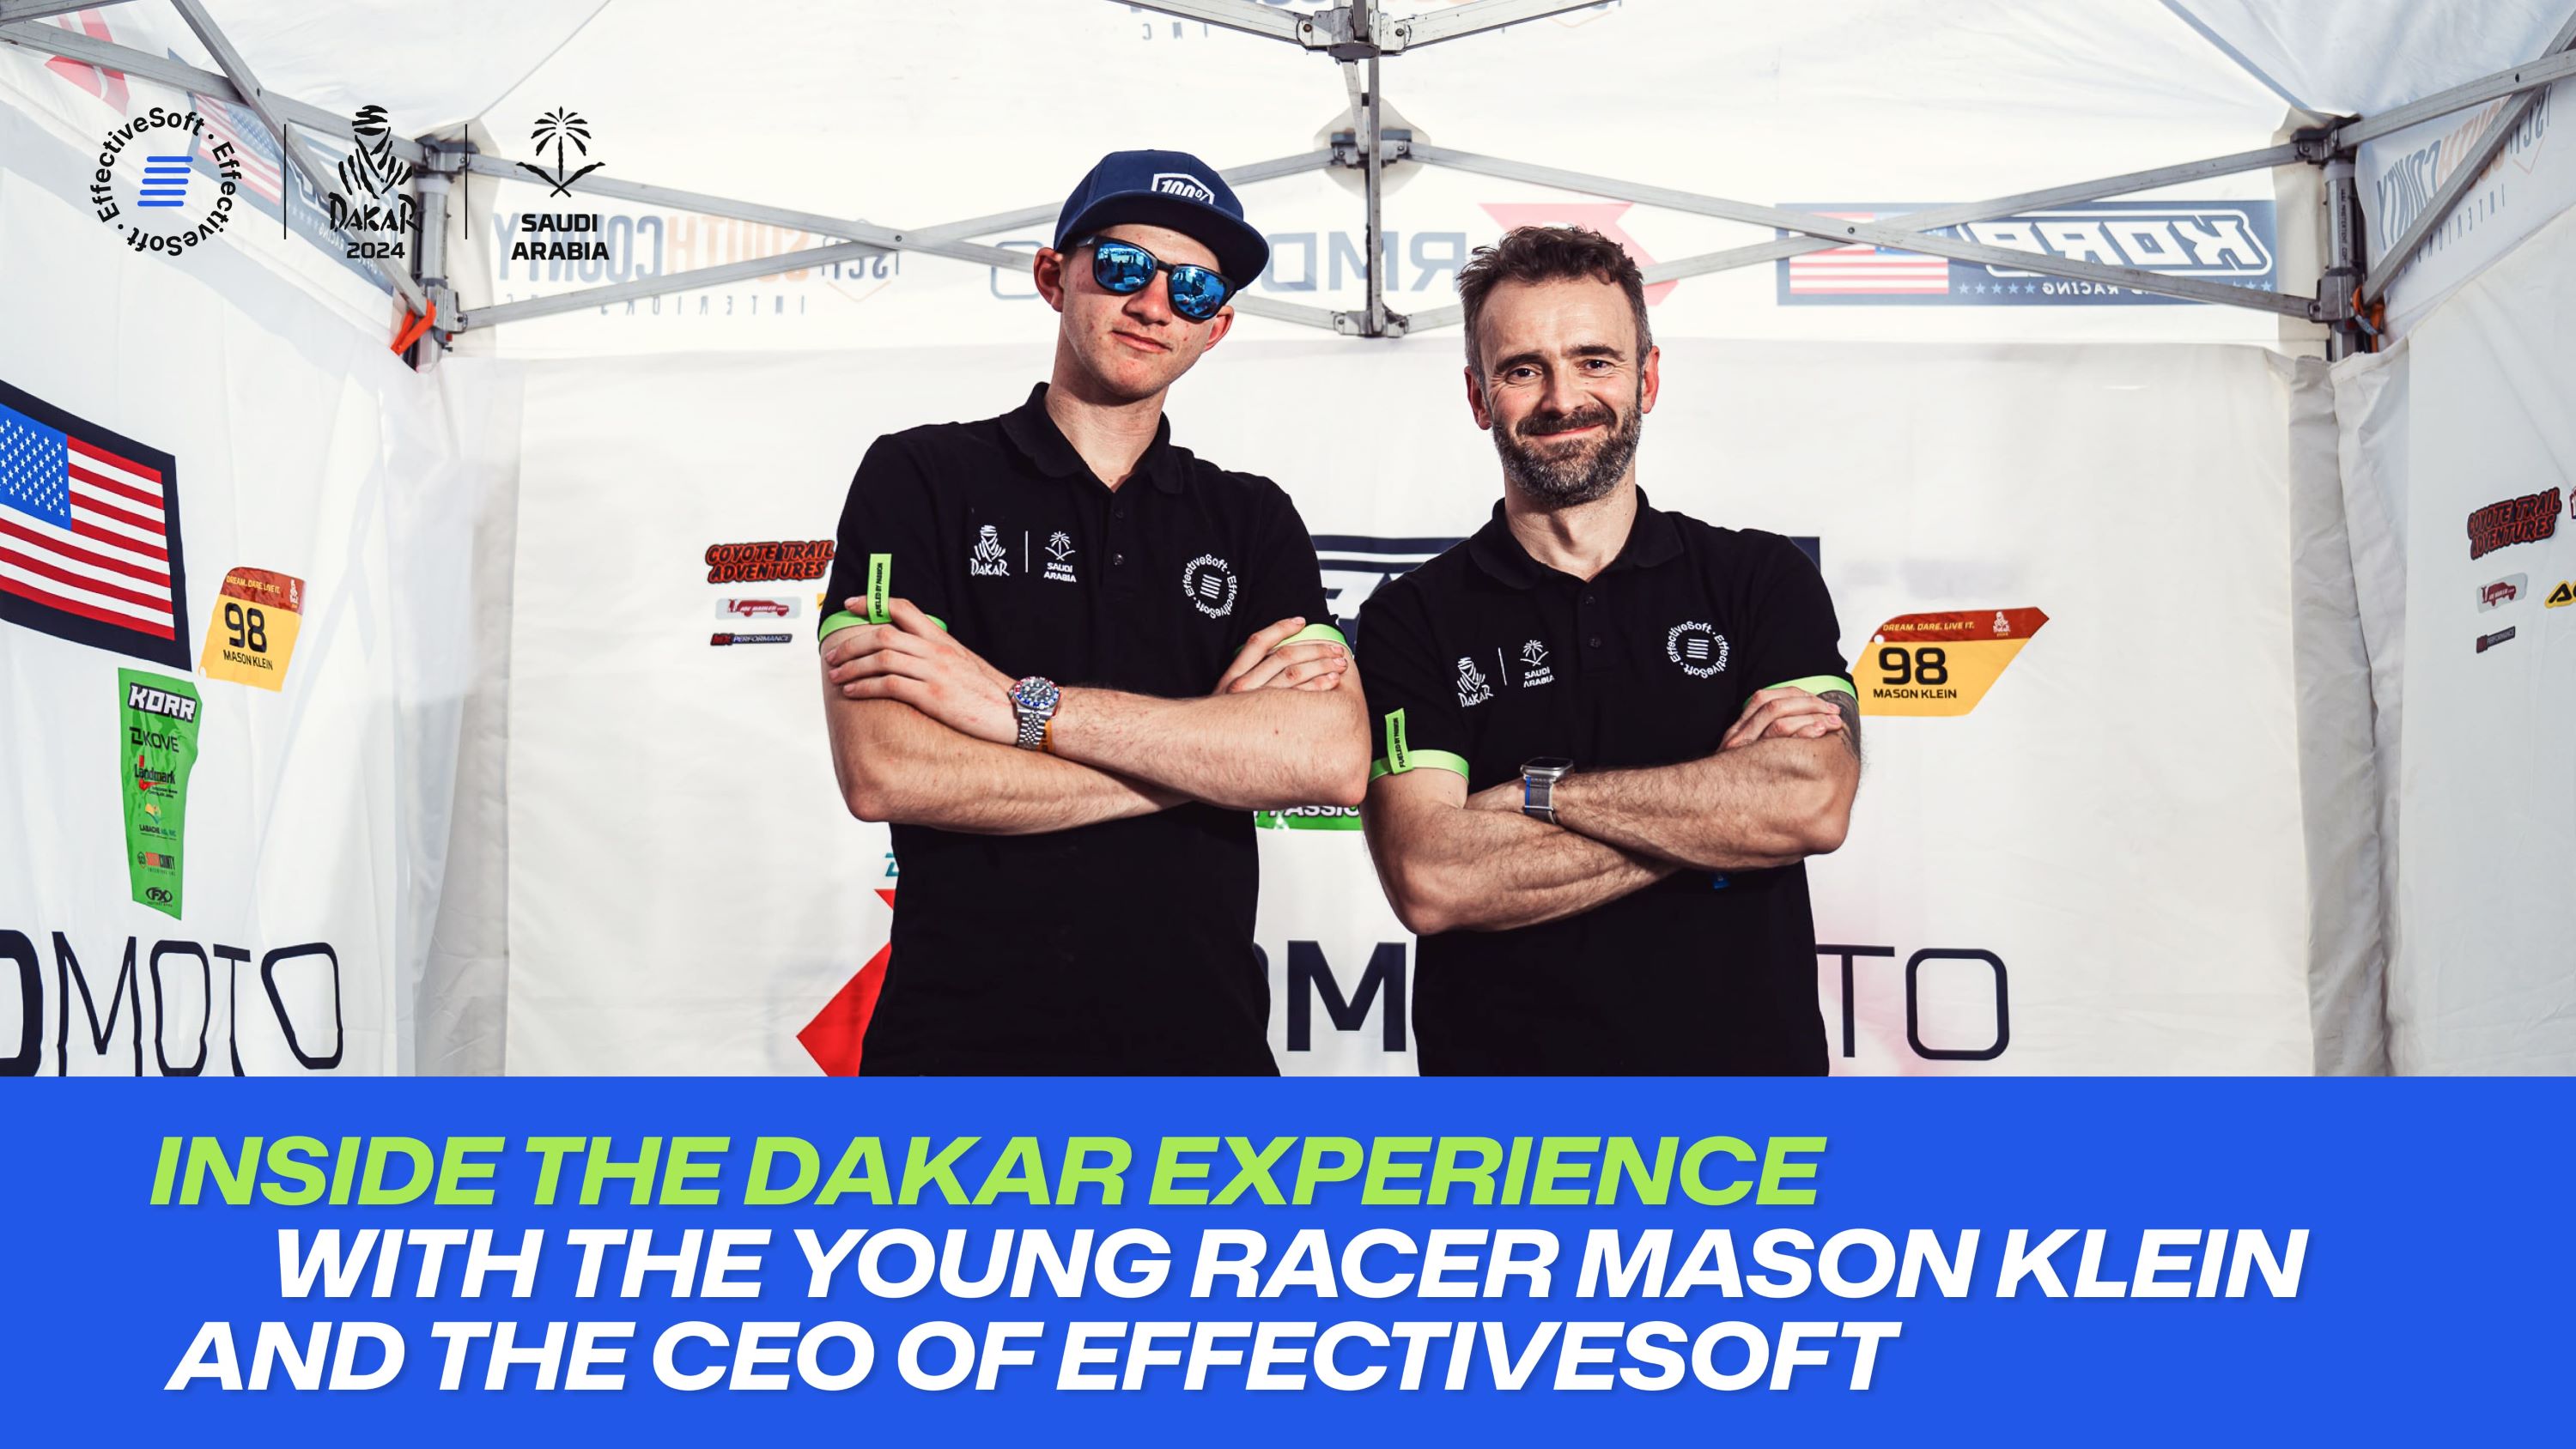 Inside the Dakar 2024 experience with Mason Klein: challenges and success stories - EffectiveSoft